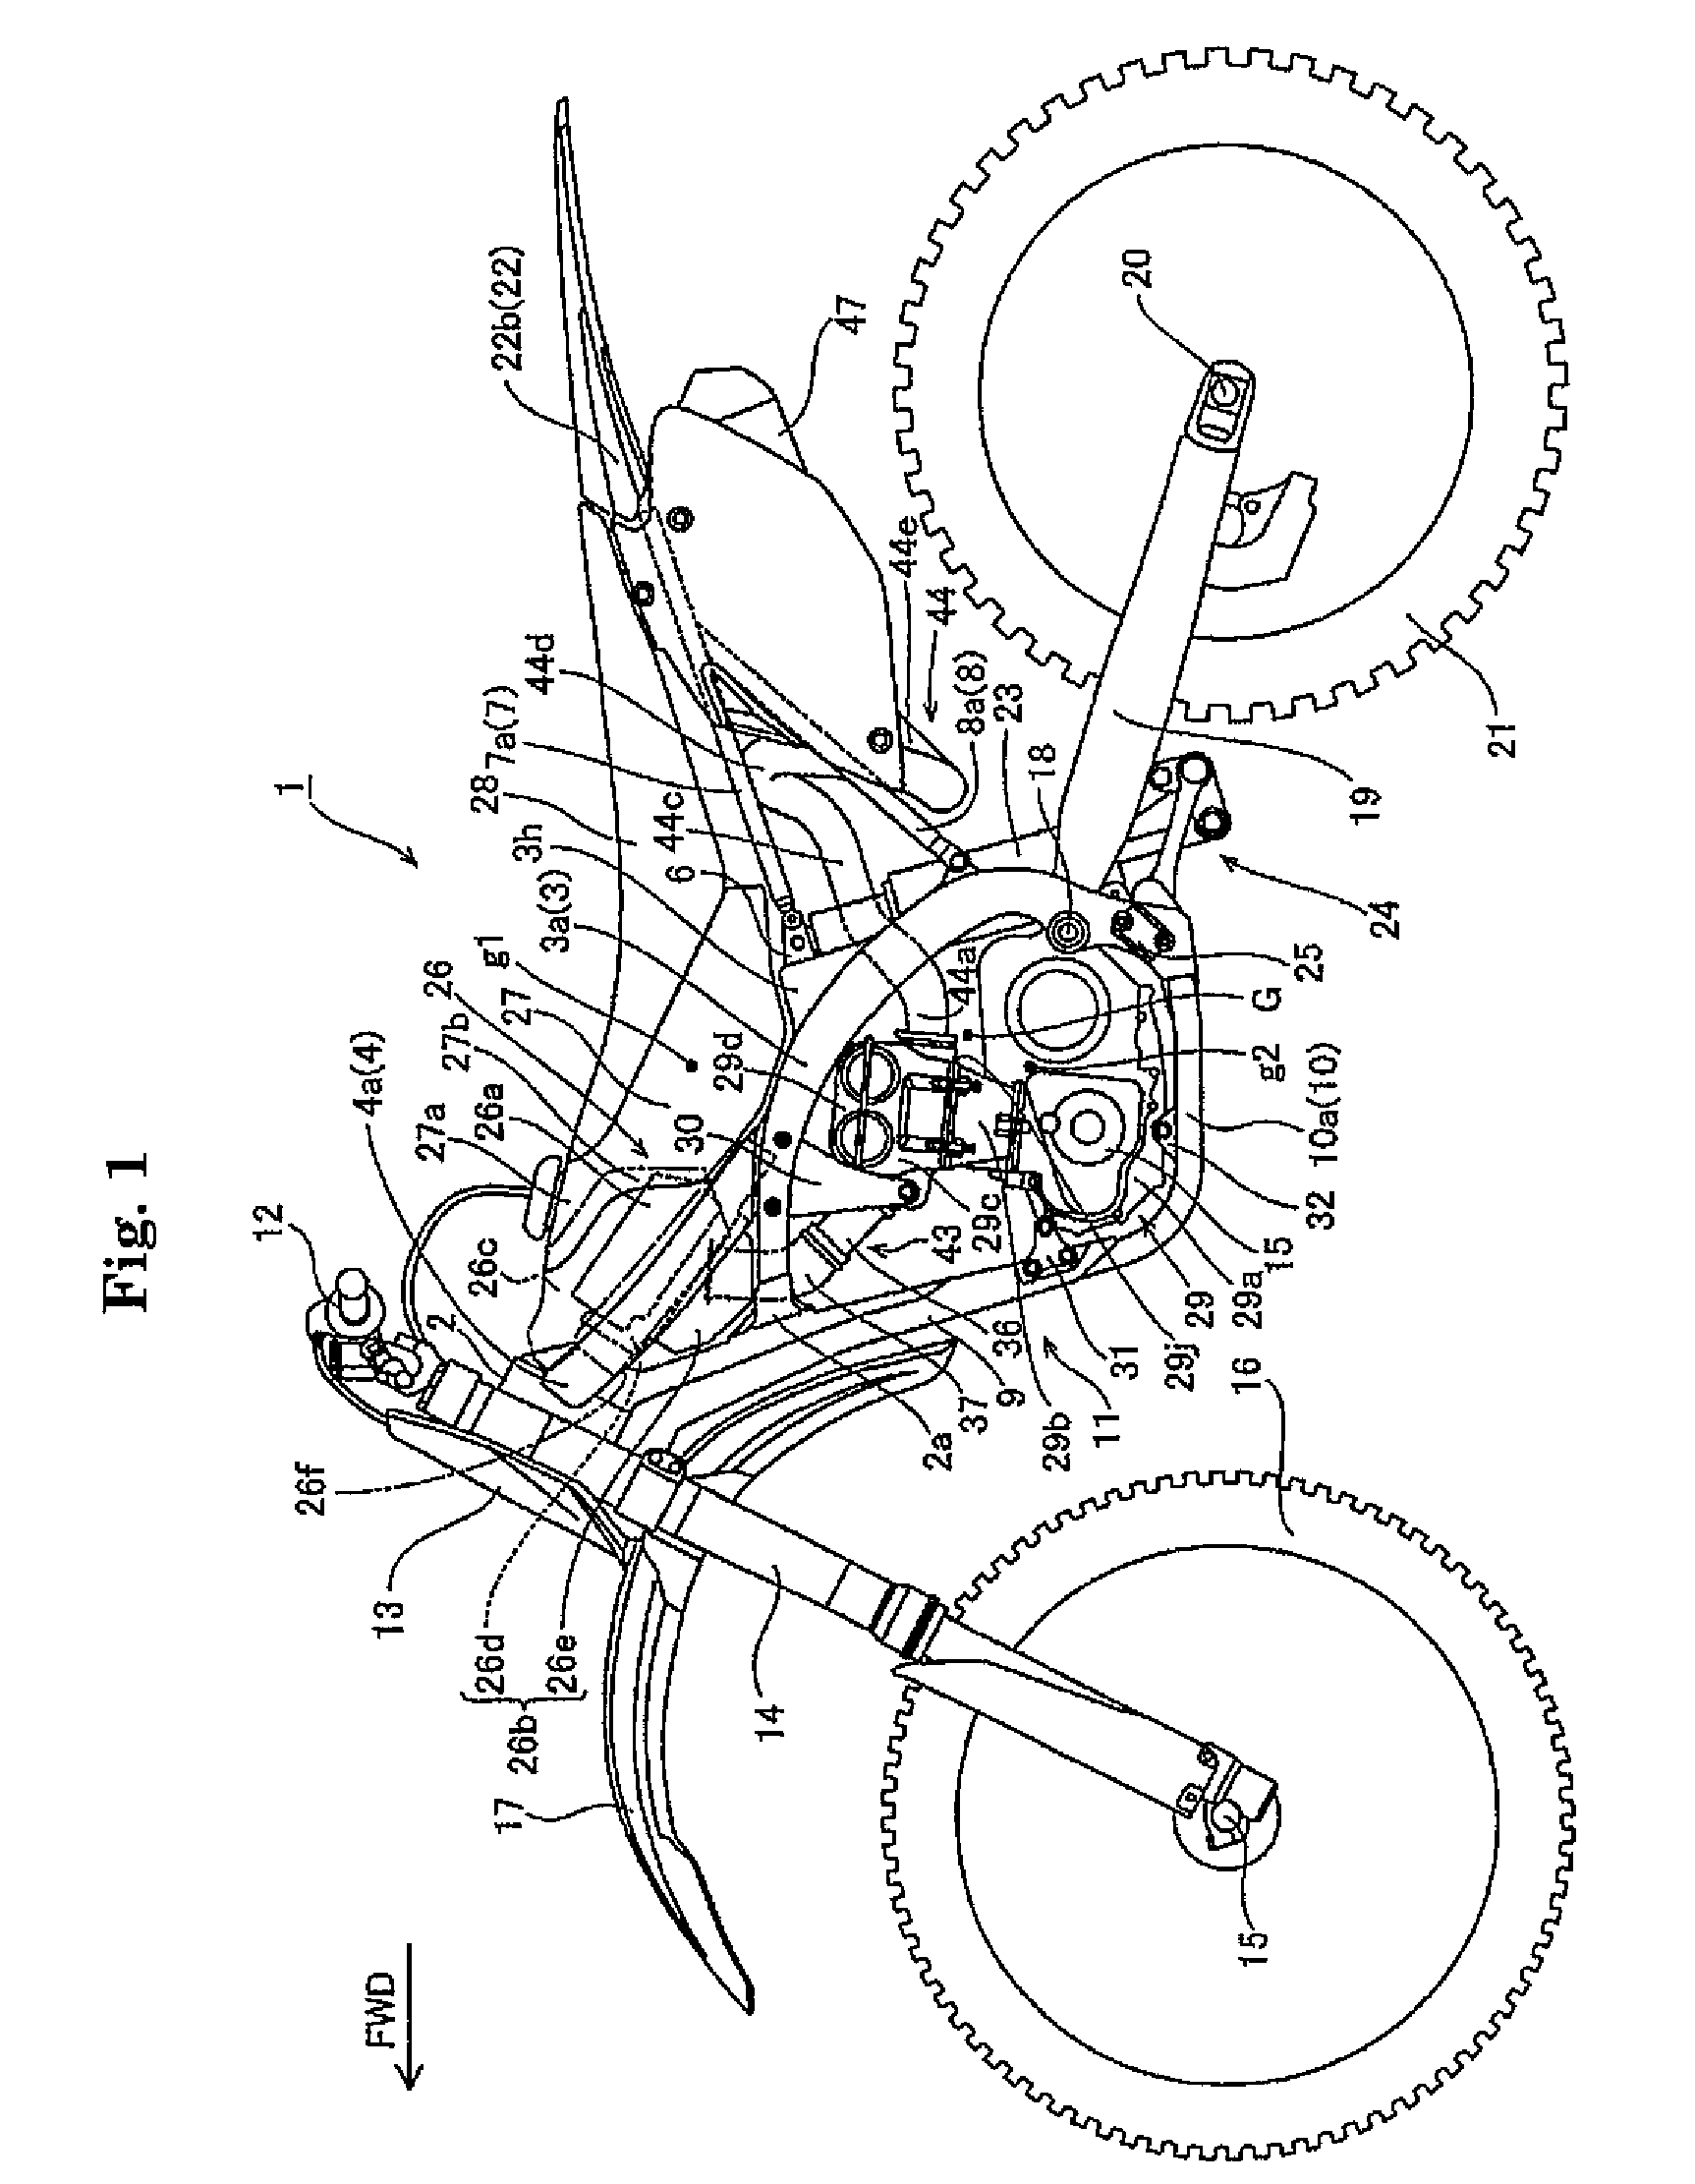 Relative configuration of an engine intake pipe for a motorcycle